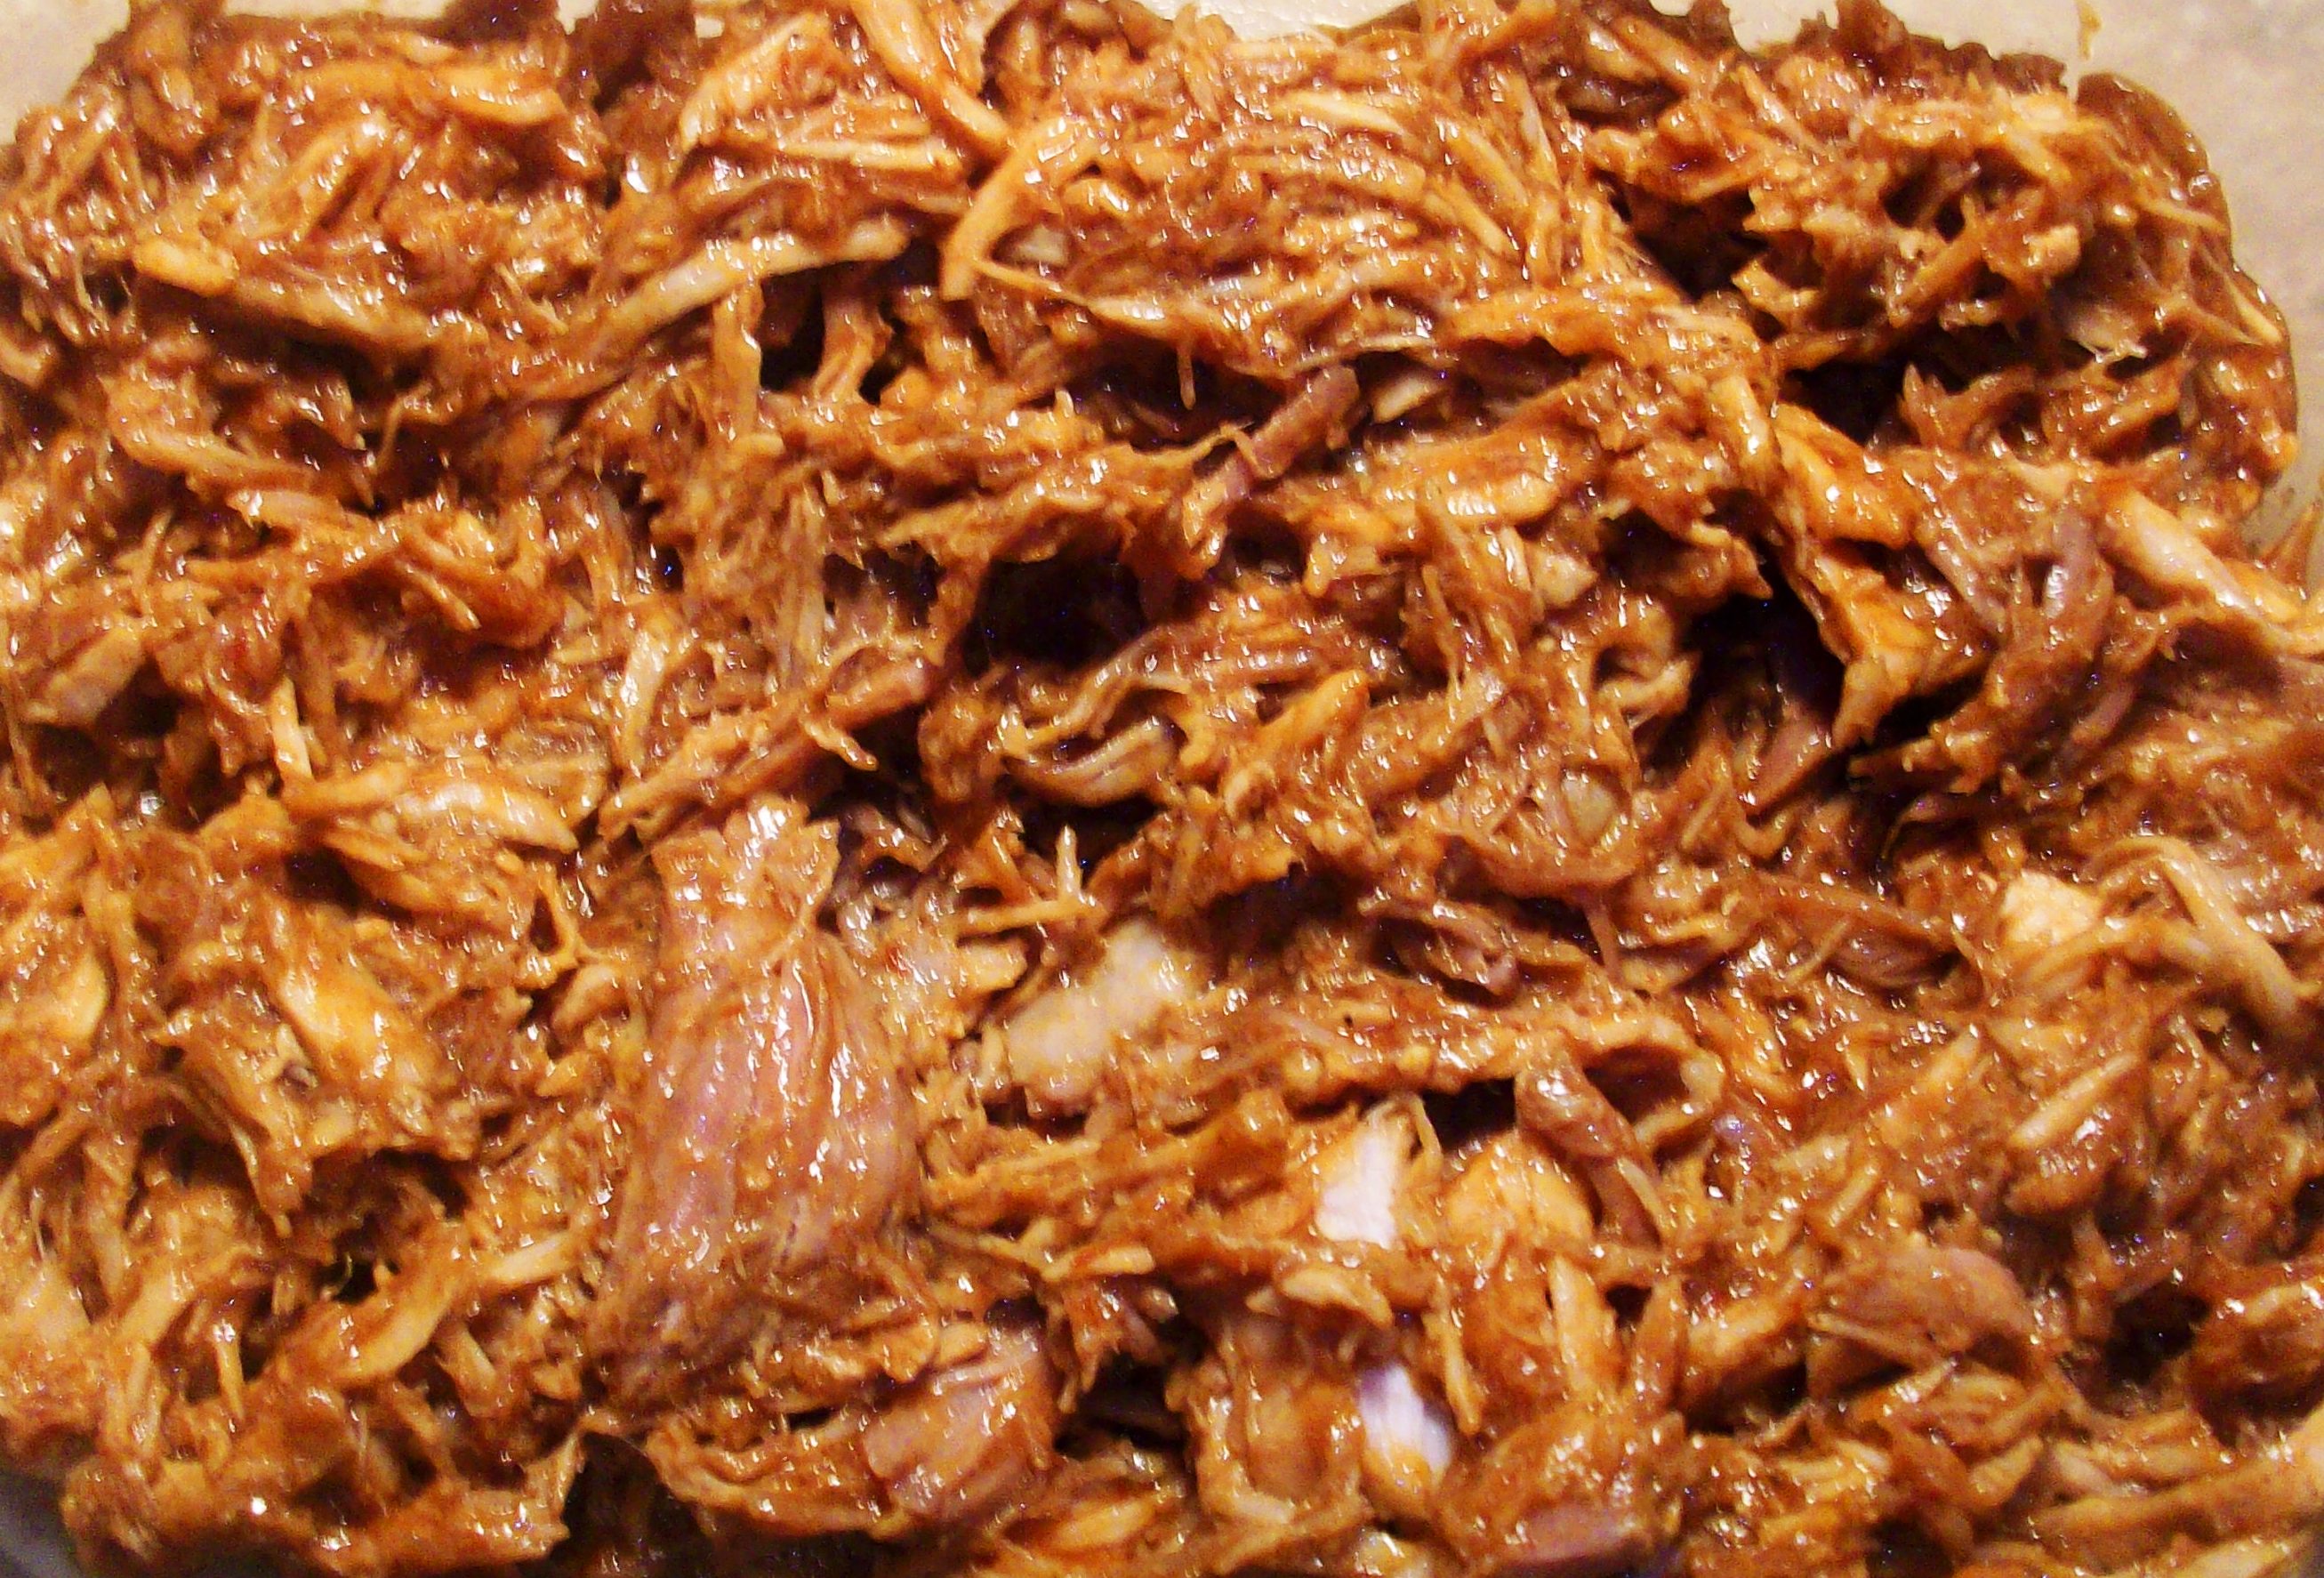 Pulled pork in the Pot